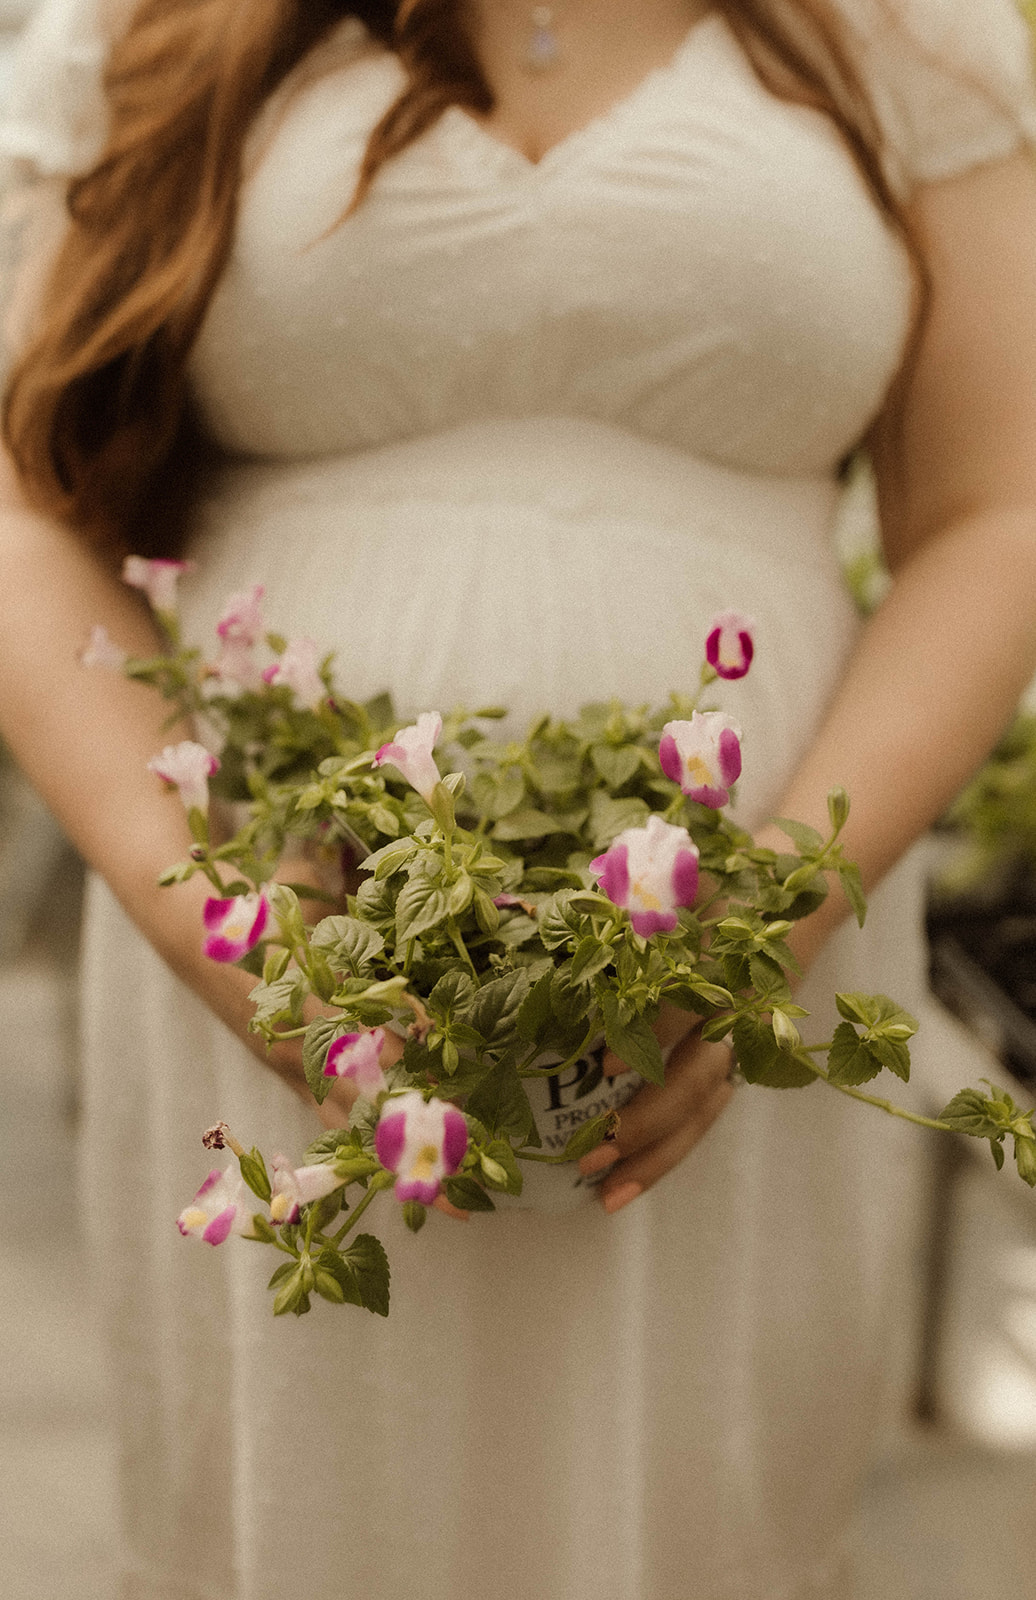 Stunning soon to be mother poses with a flower bouquet during her unique maternity shoot